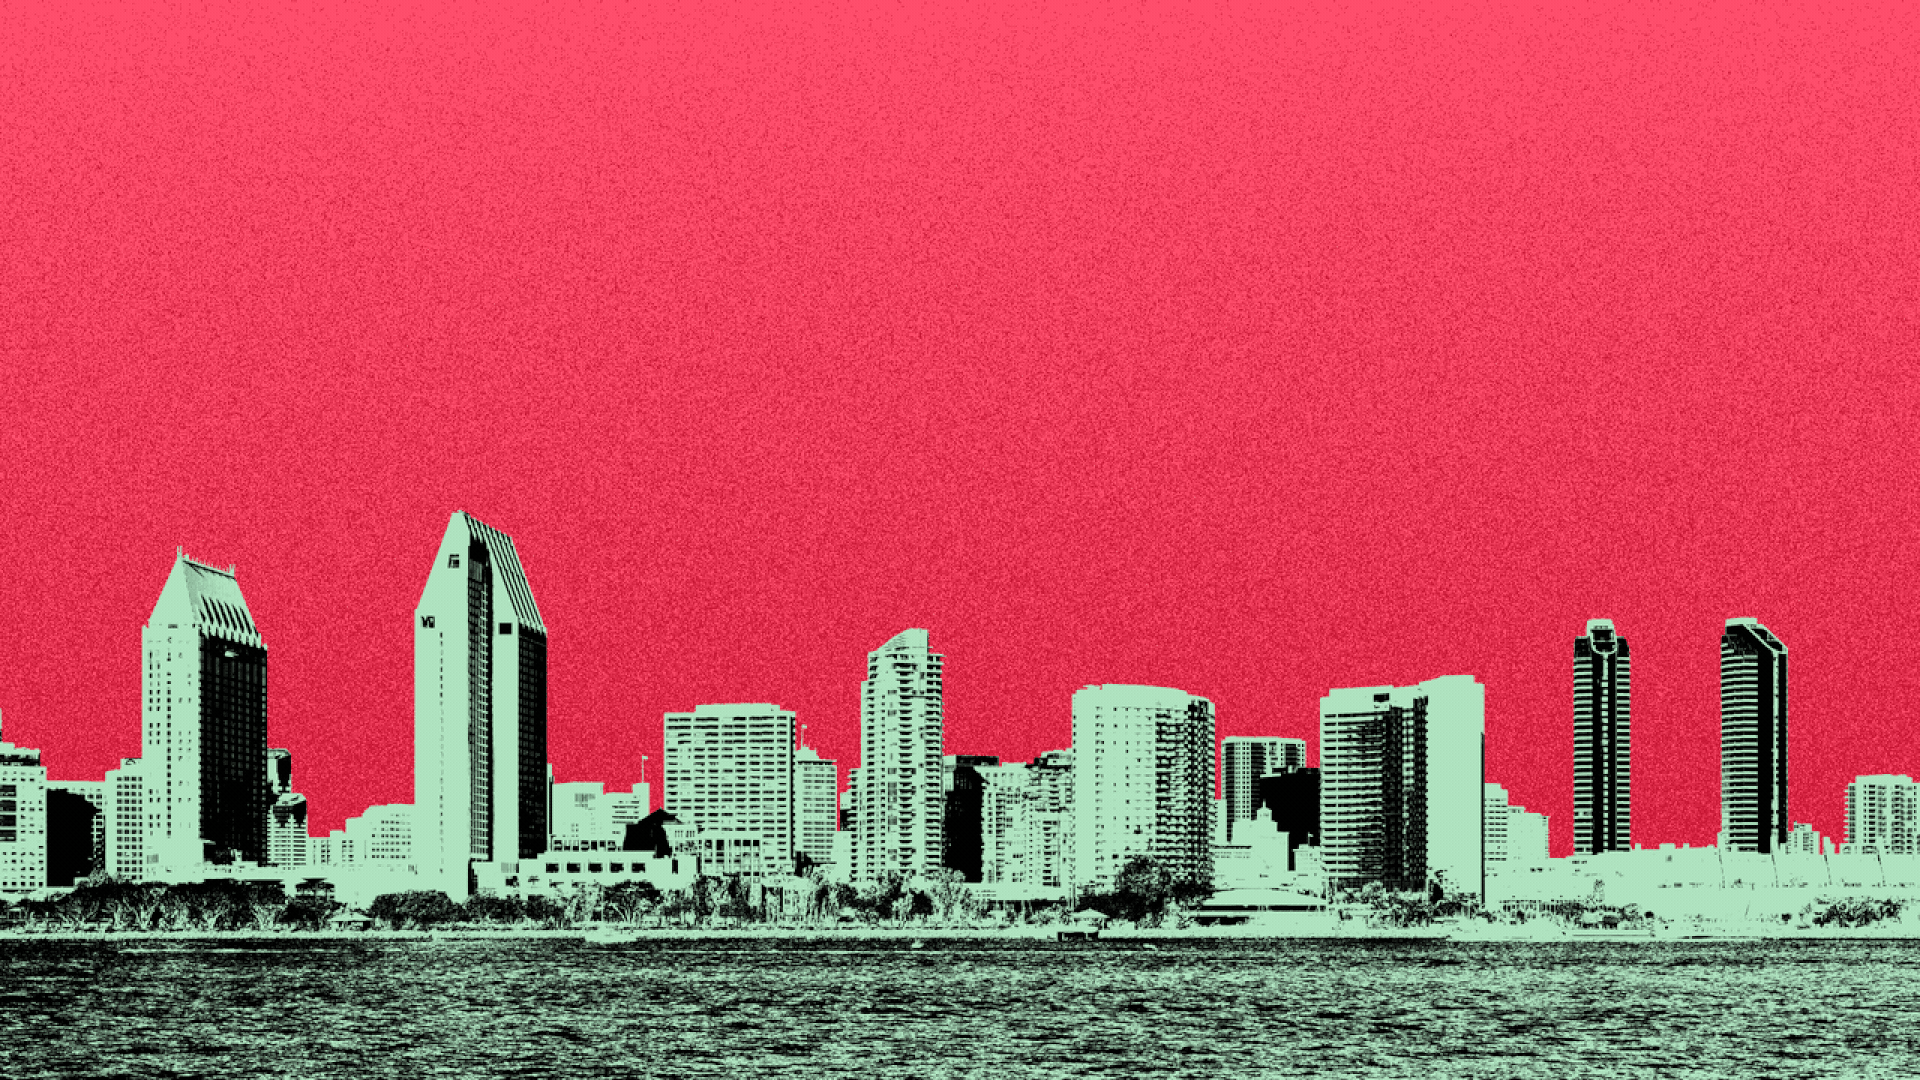 Illustration of the San Diego skyline, with word balloons with exclamation points in them popping up above it from left to right.